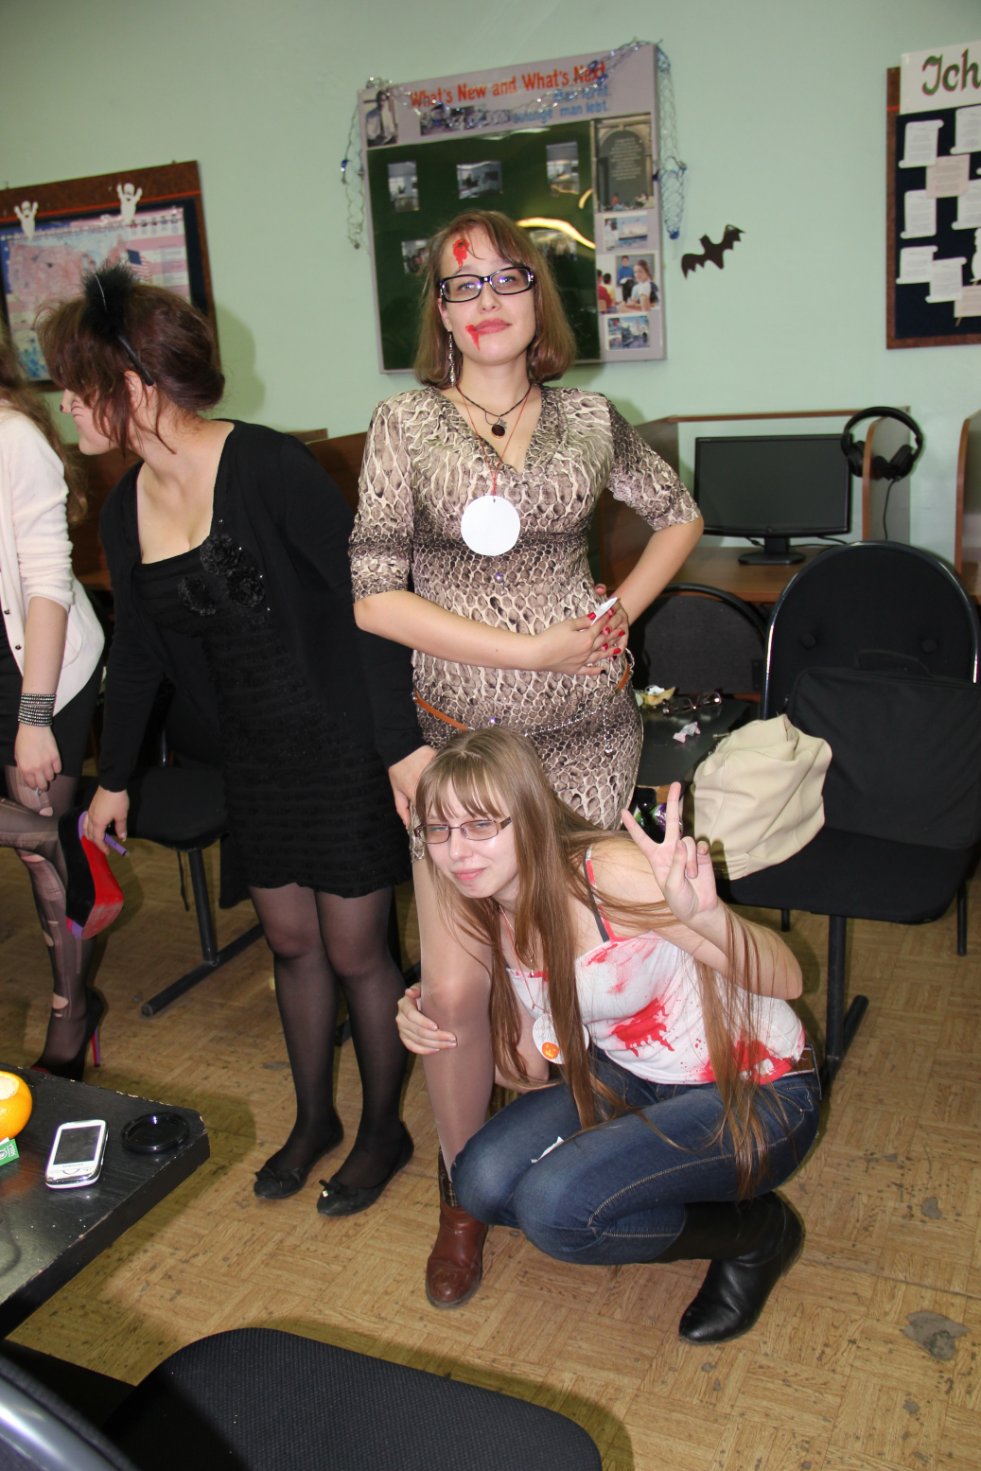 Halloween party in the philological department! ,  ,  